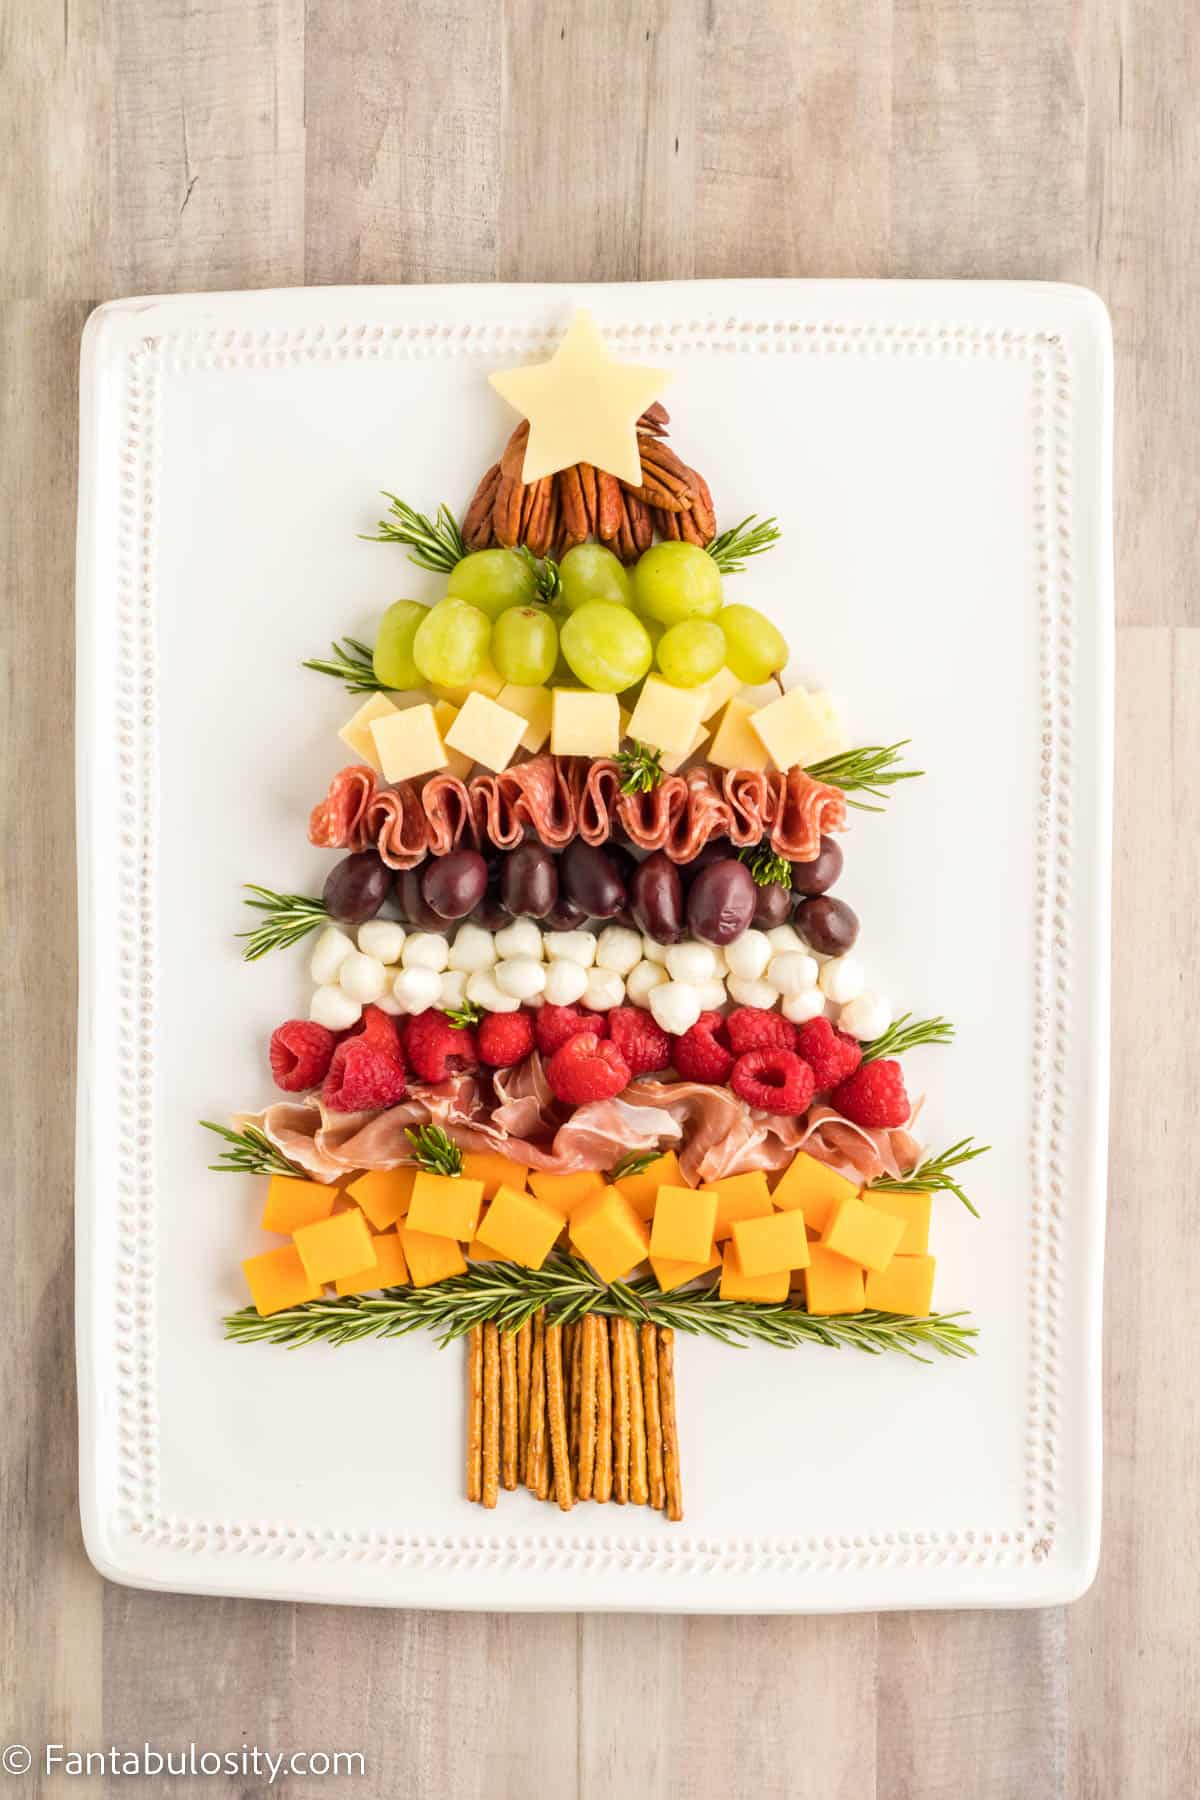 Additional sprigs of fresh rosemary have been tucked into the fruit, nuts, meats and cheese of a Christmas tree shaped platter of charcuterie